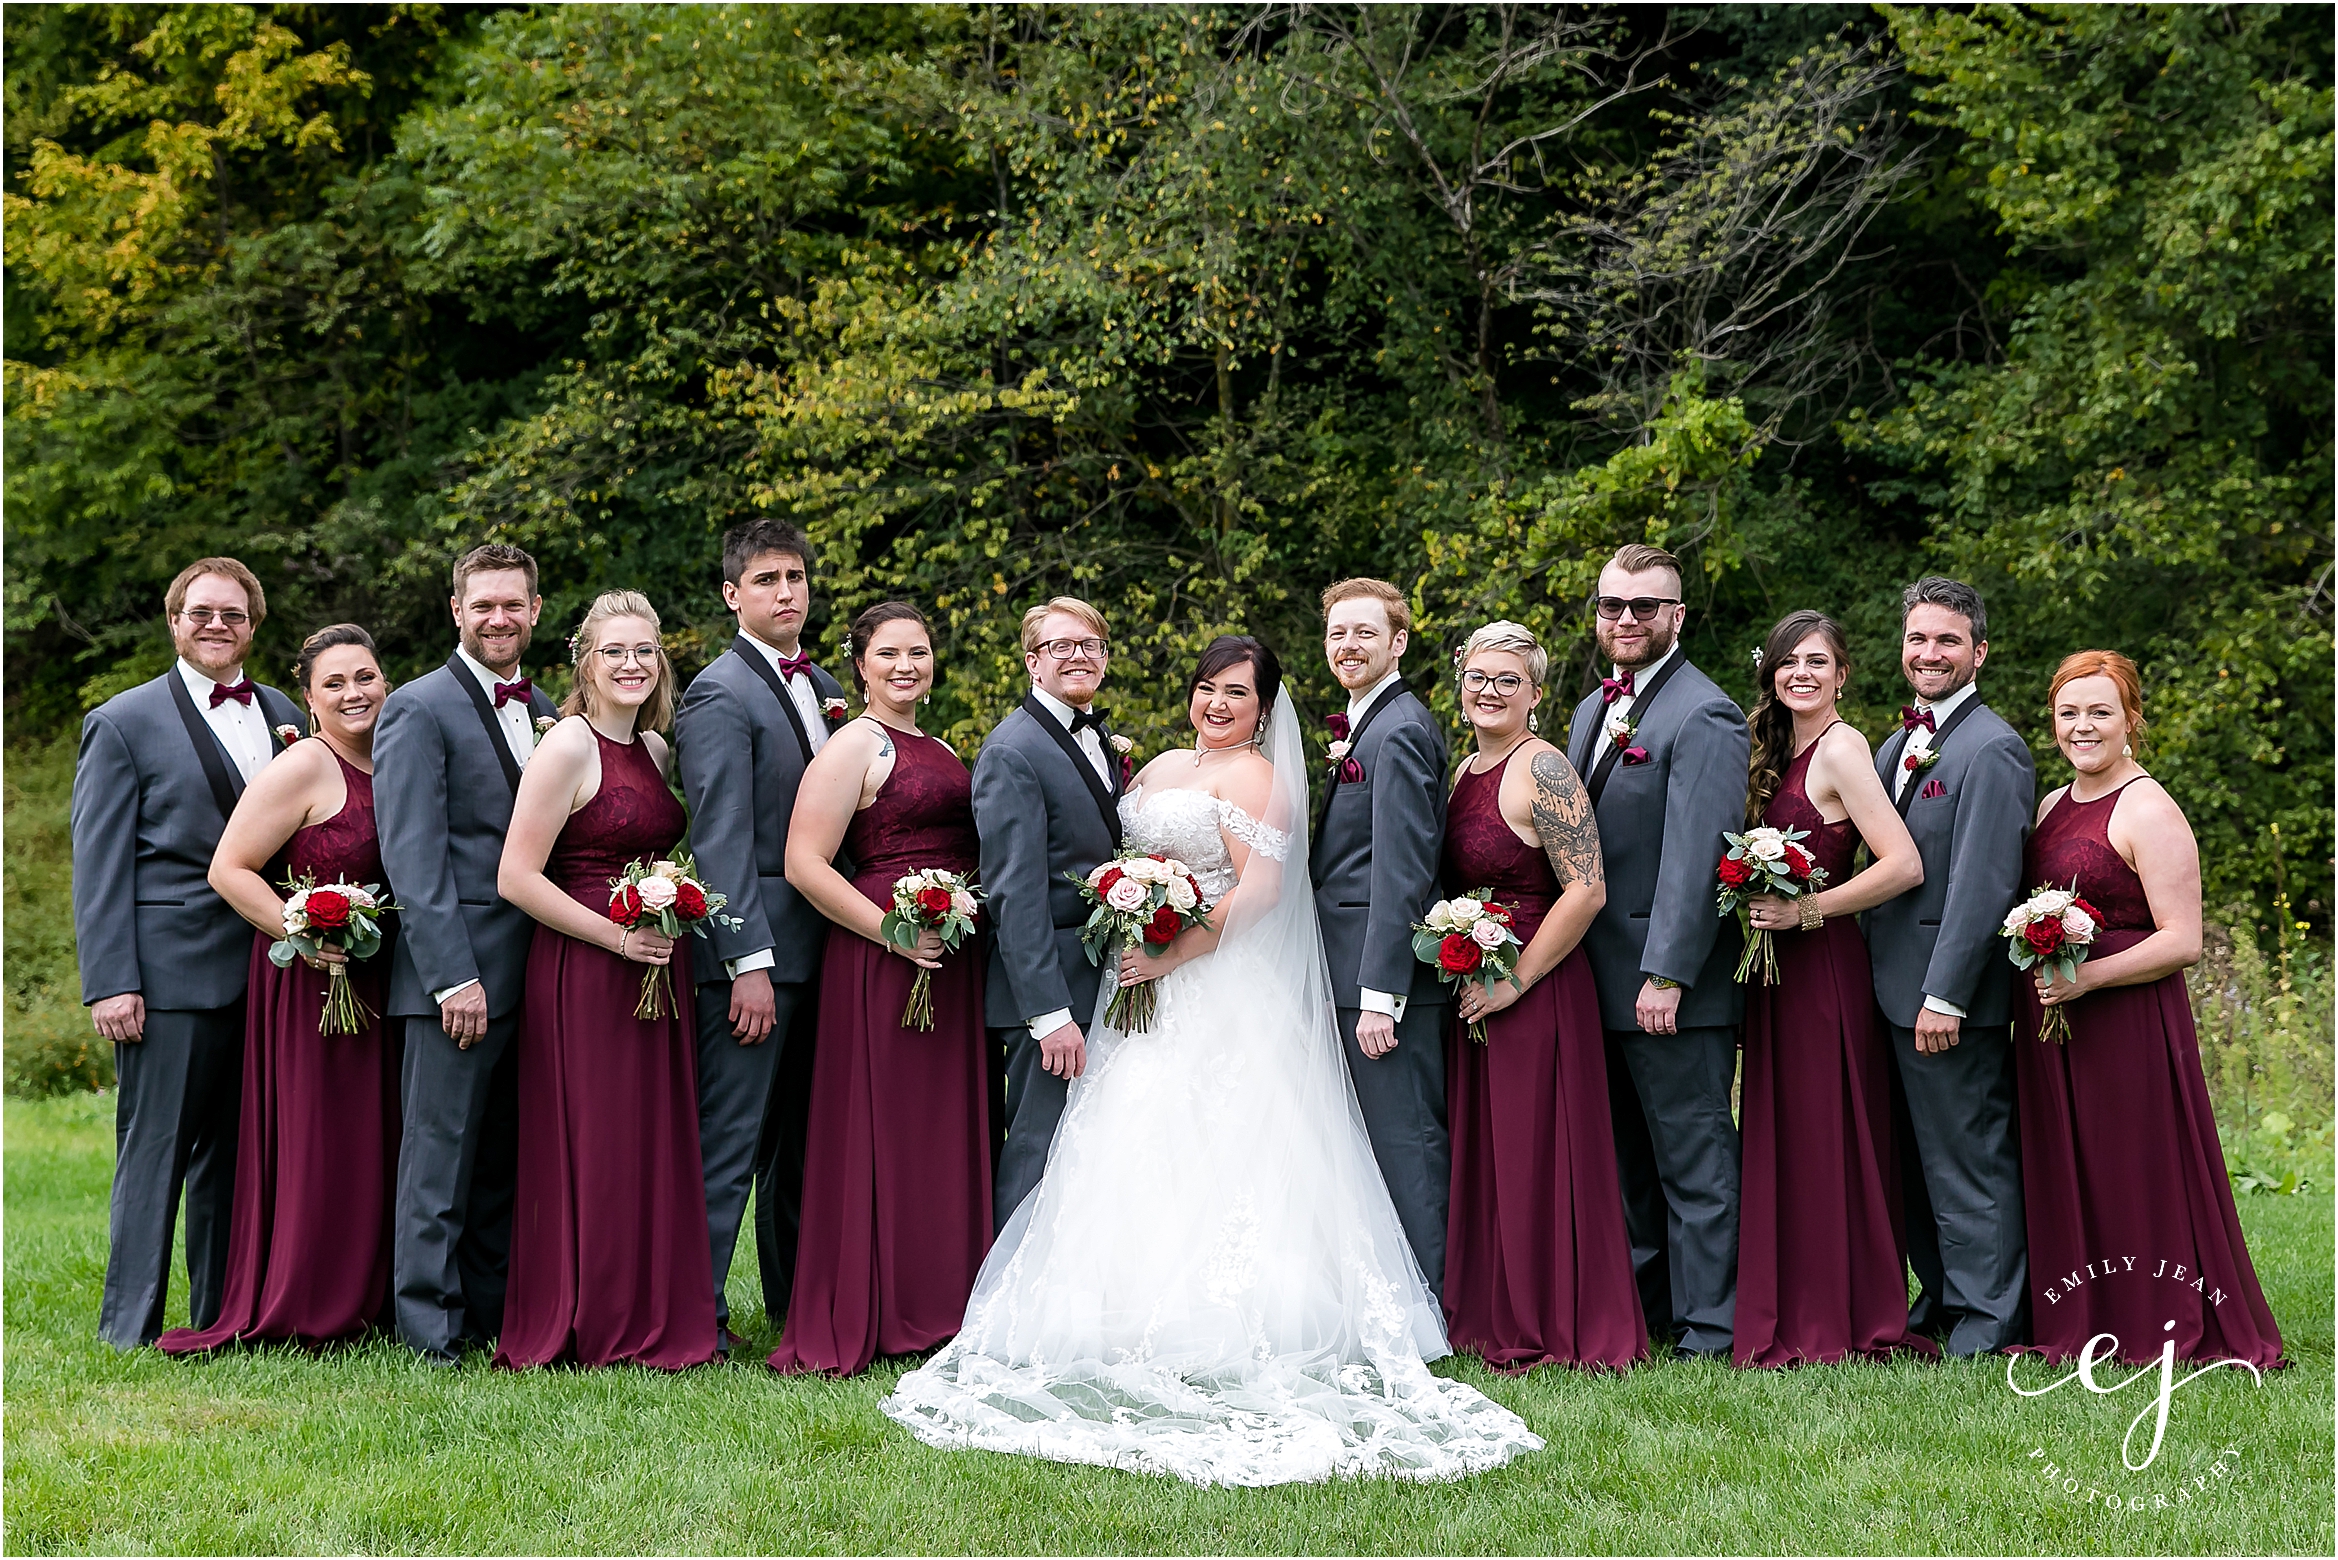 grey tuxedos and red dresses bridal wedding party bride and groom long veil lace grey suit dipping winnebago springs wedding venue in caledonia minnesota